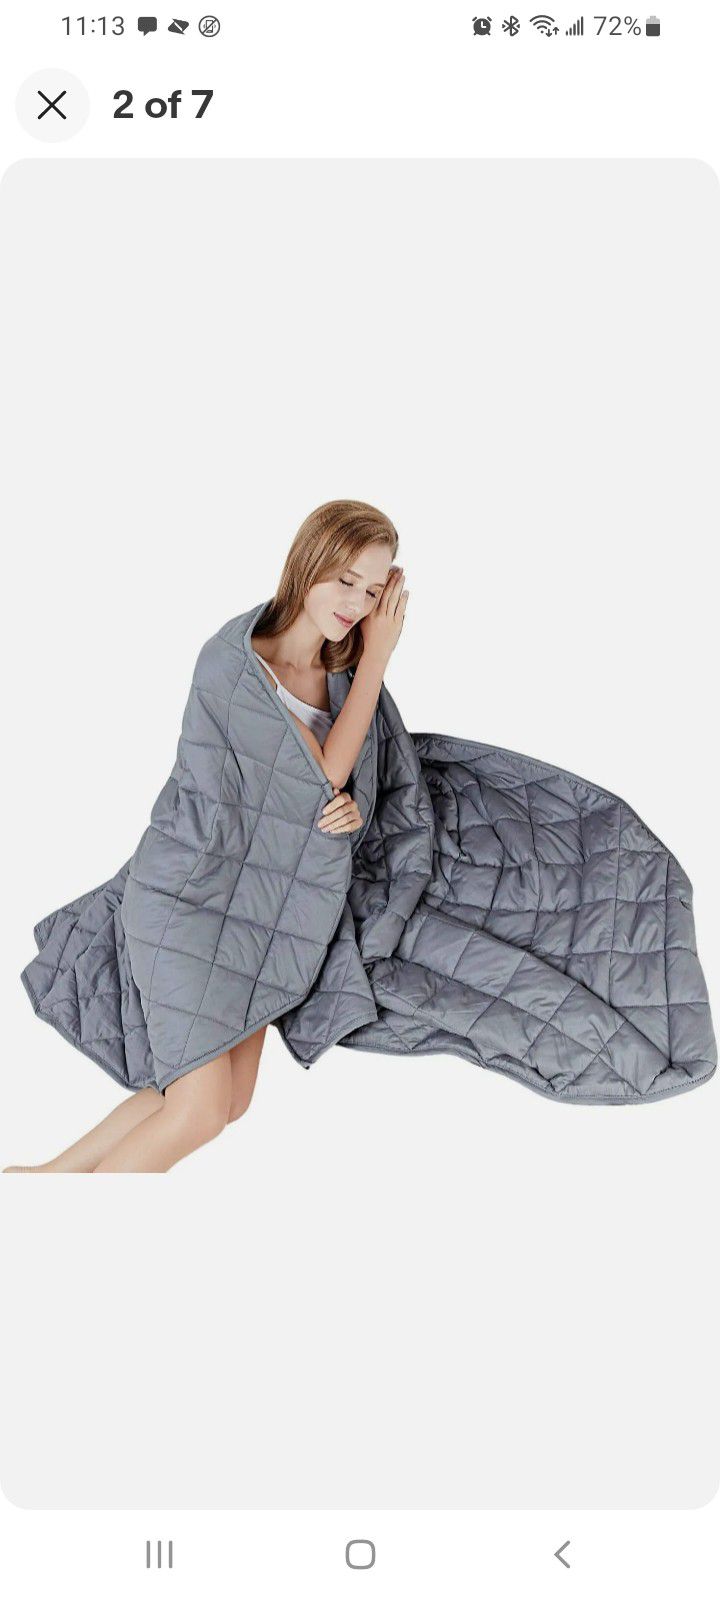 New Weighted Blanket By Hypnoser